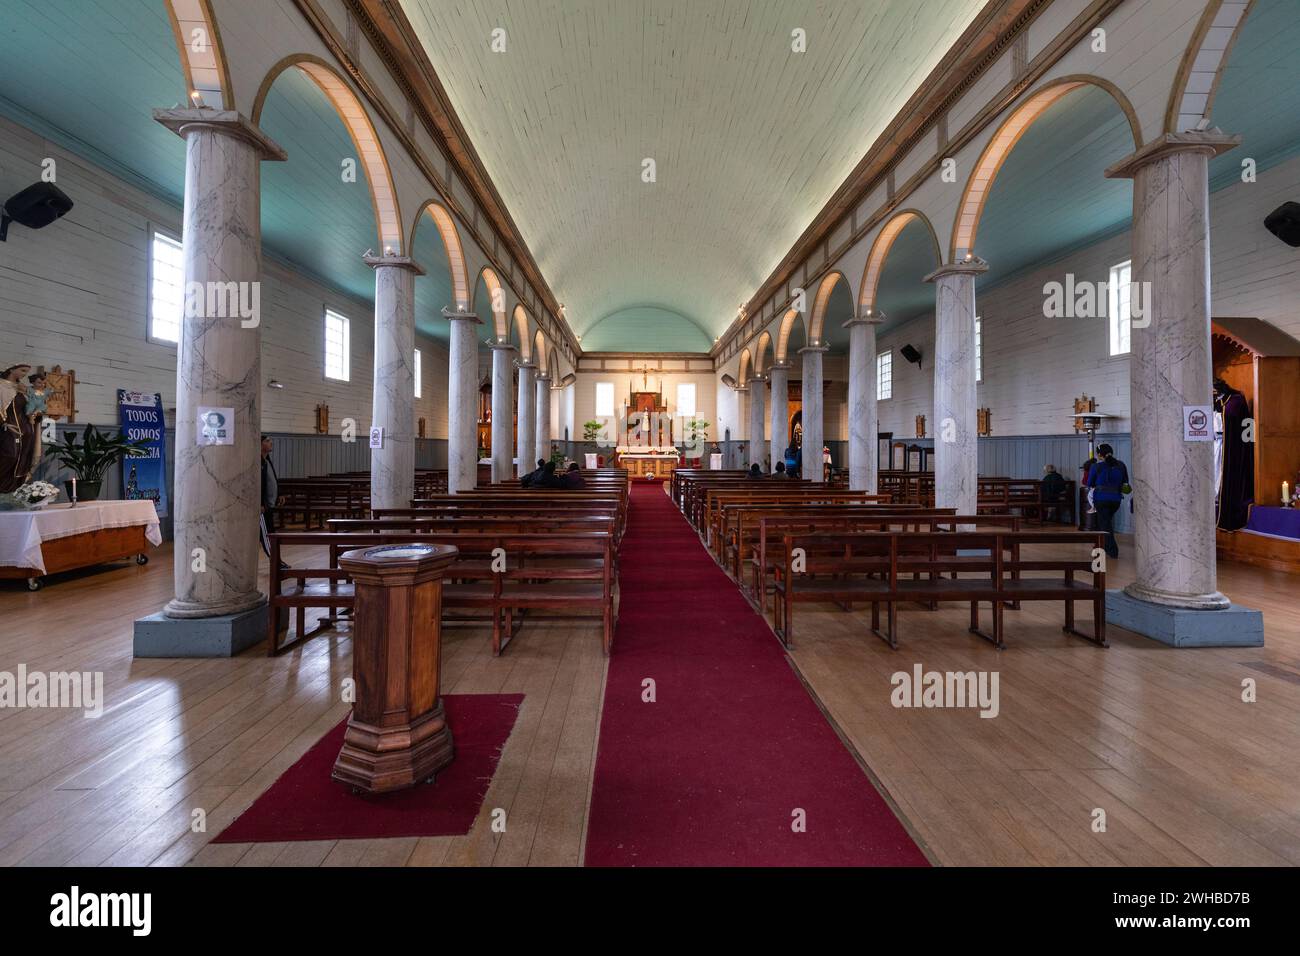 Interior view of an old wooden church on Chiloe including a white portico, round arches and red carpet. Stock Photo